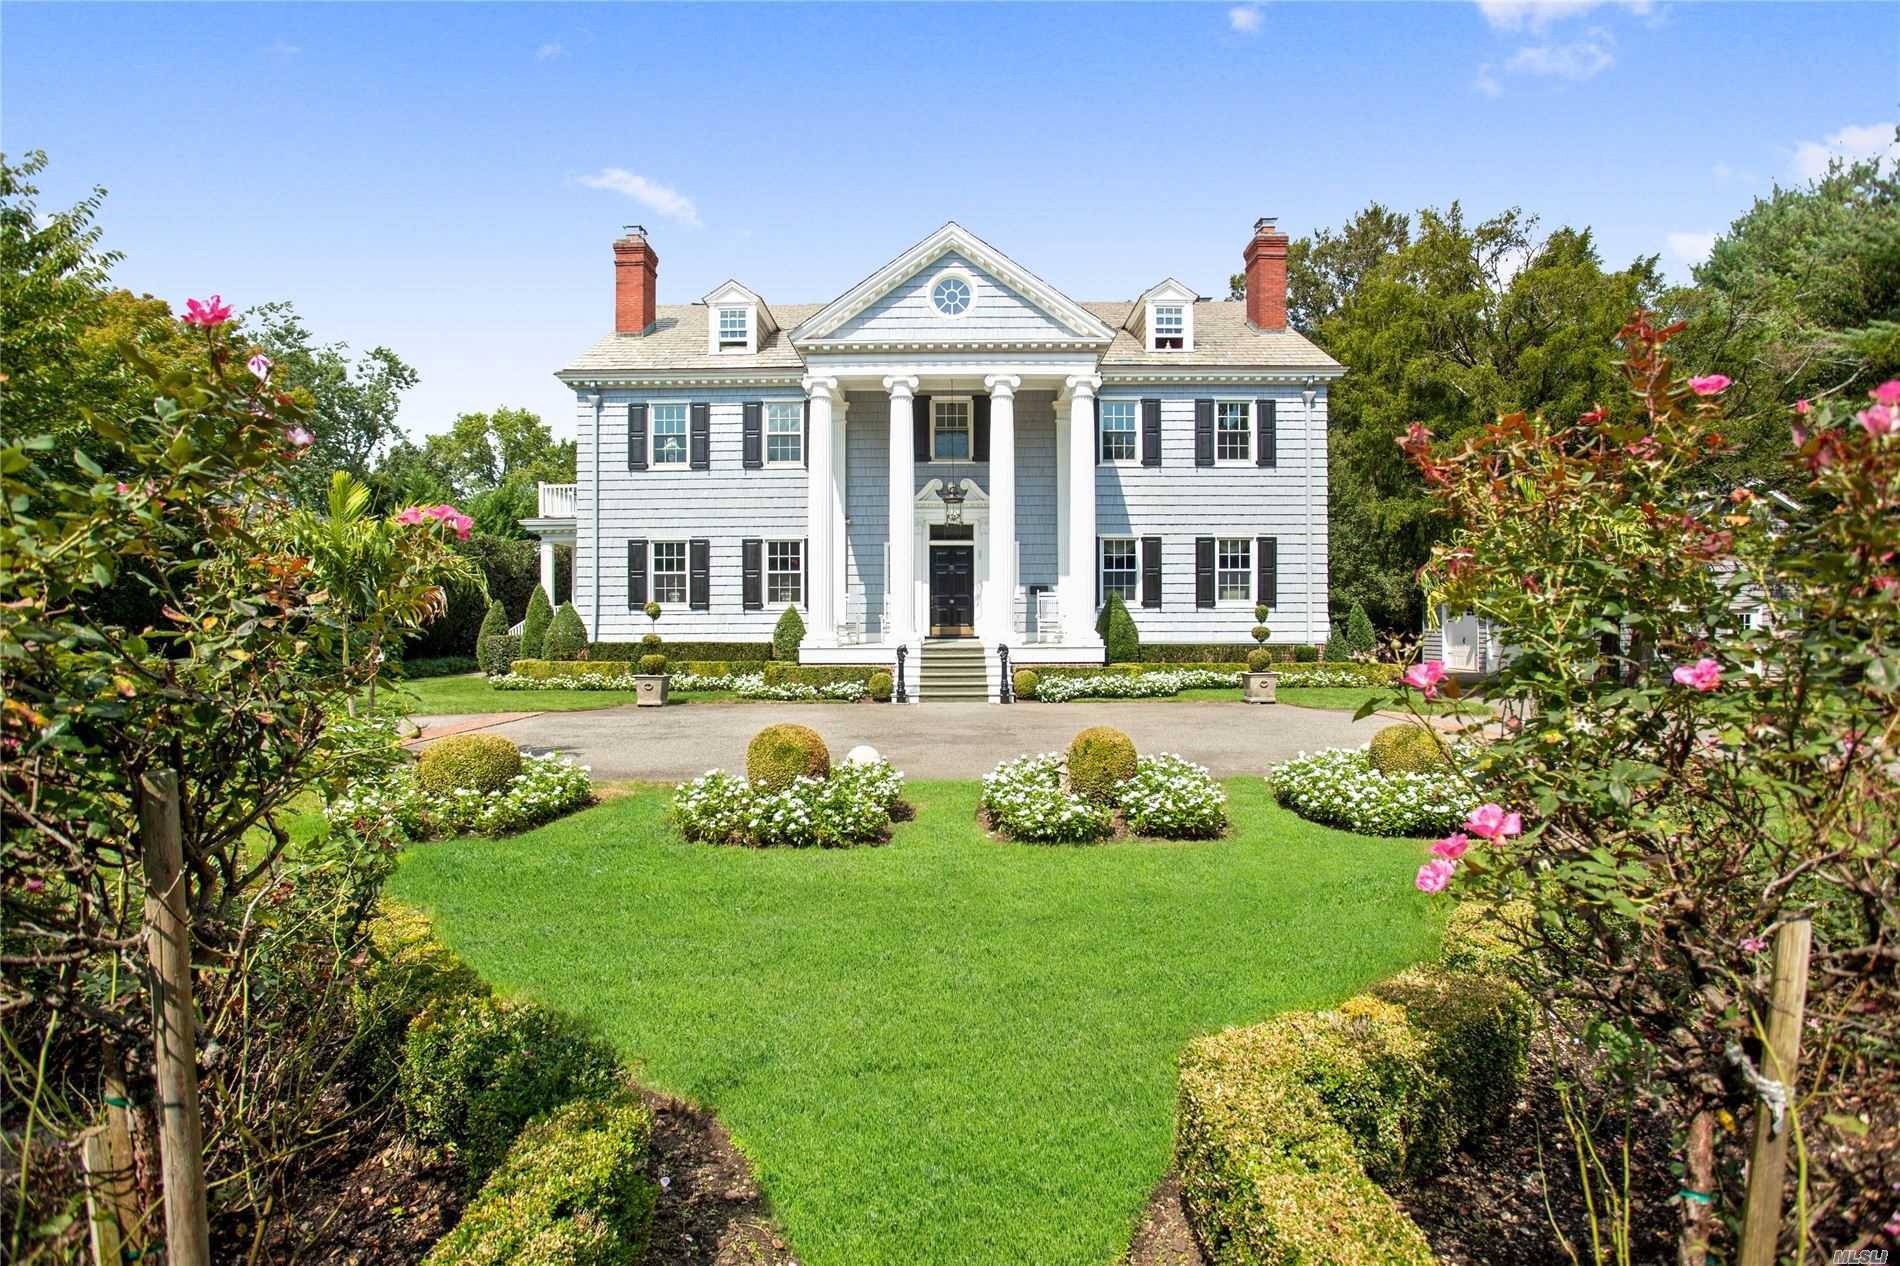 Behind the wall thru the gates is this extraordinary, 1913 center hall Georgian colonial offering the utmost in privacy, prominence prestige all within walking distance of town the LIRR.